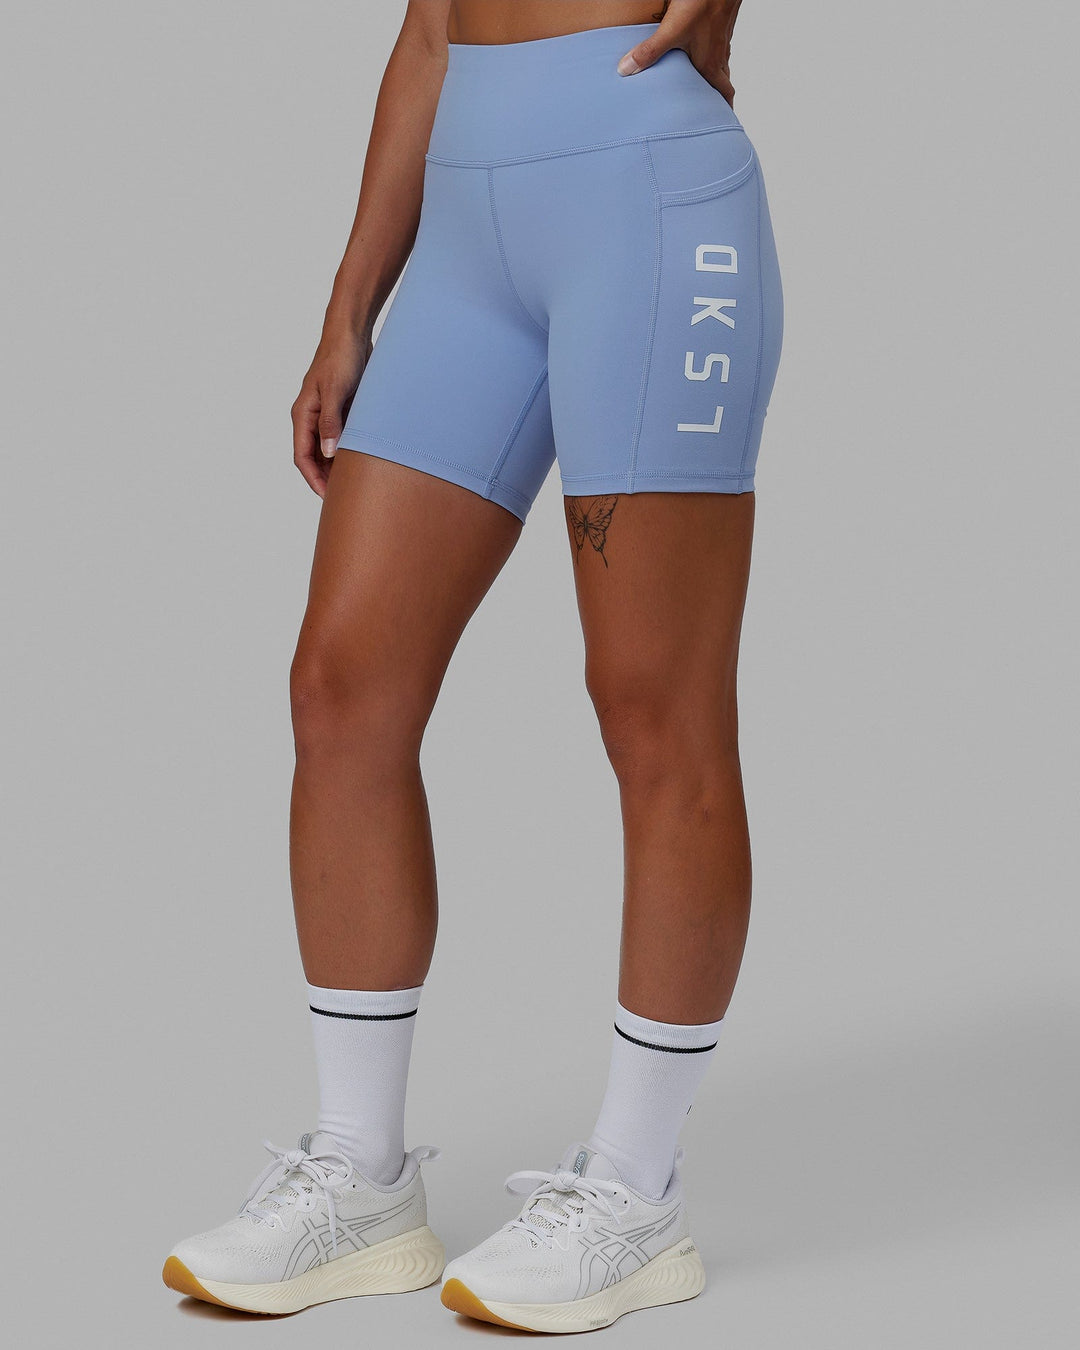 Rep Mid-Length Shorts - Arctic Blue-White